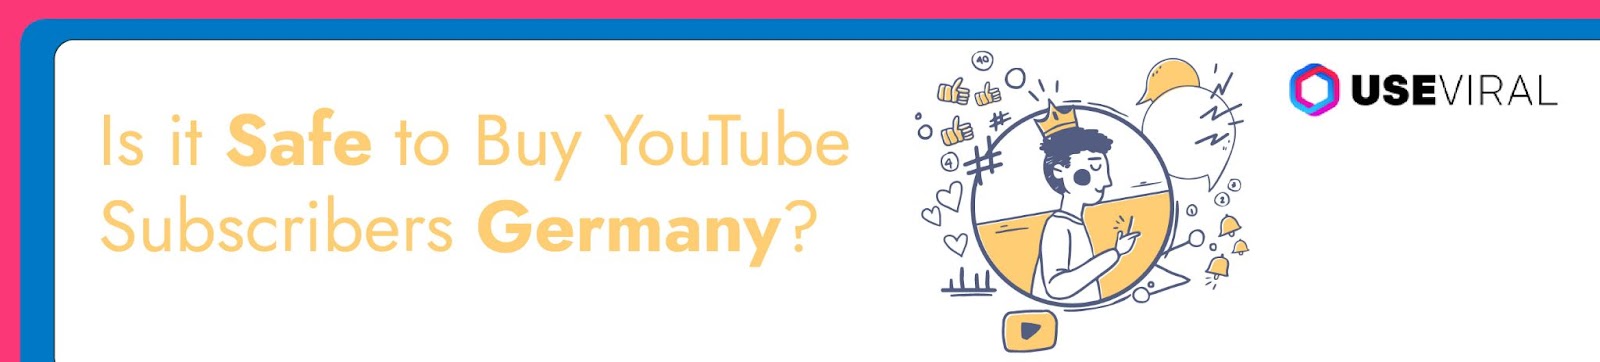 Is it Safe to Buy YouTube Subscribers Germany?